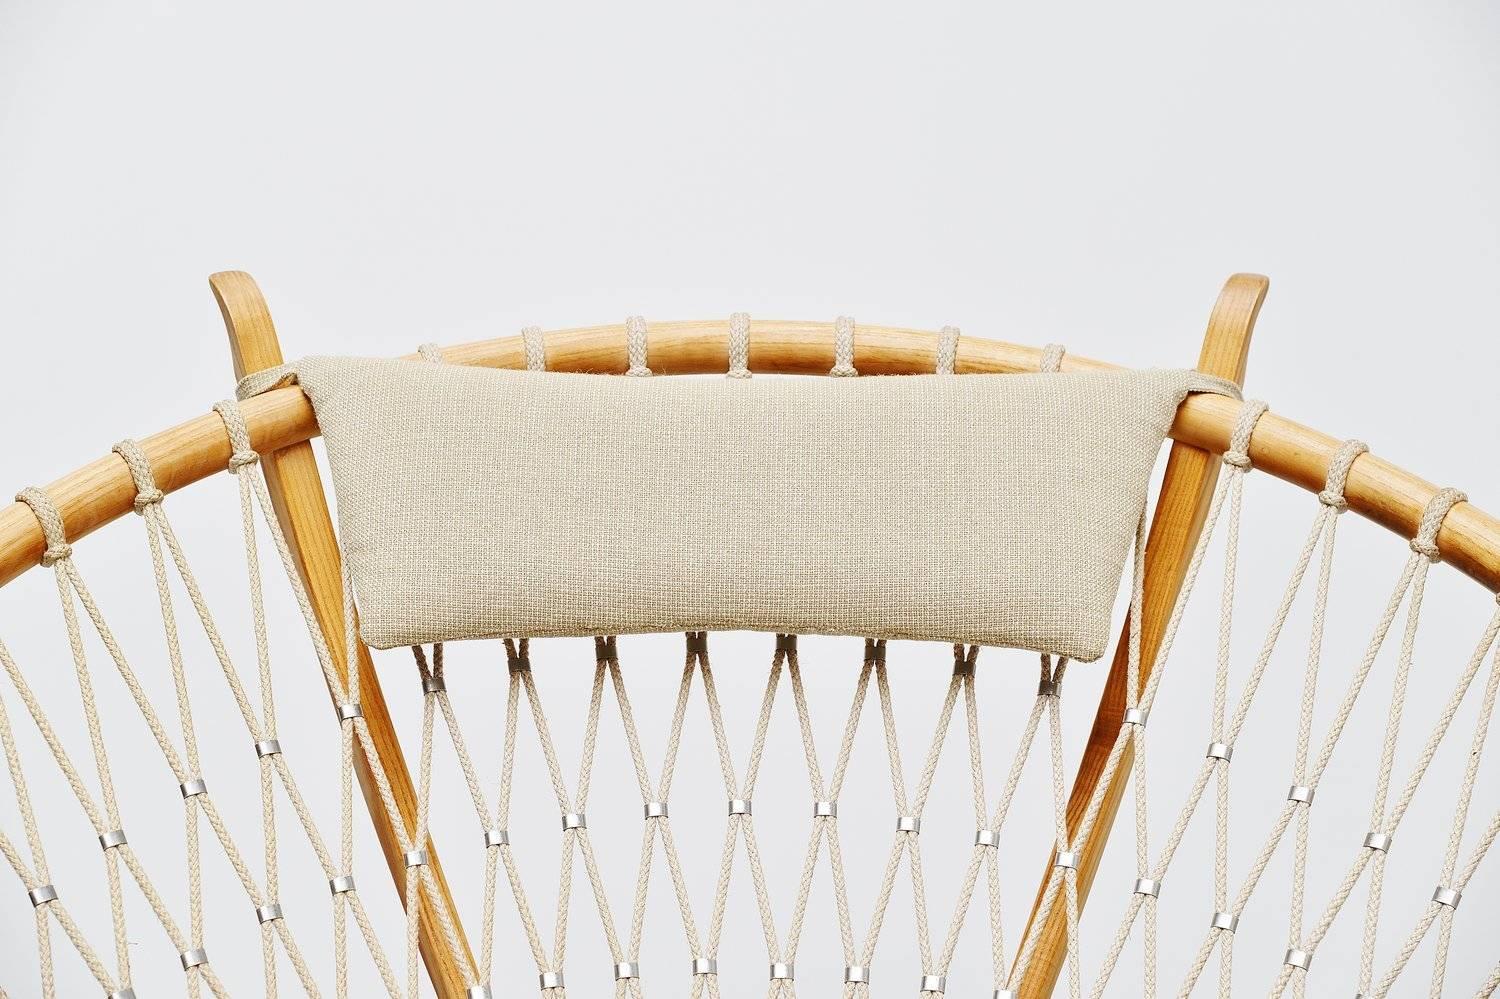 Sophisticated circle lounge chair model PP-130 designed by Hans J. Wegner for PP Mobler, Denmark 1986. This chair is made of solid oak, superbly crafted and finished with rope connected with metal clips. The upholstery is still the original and the